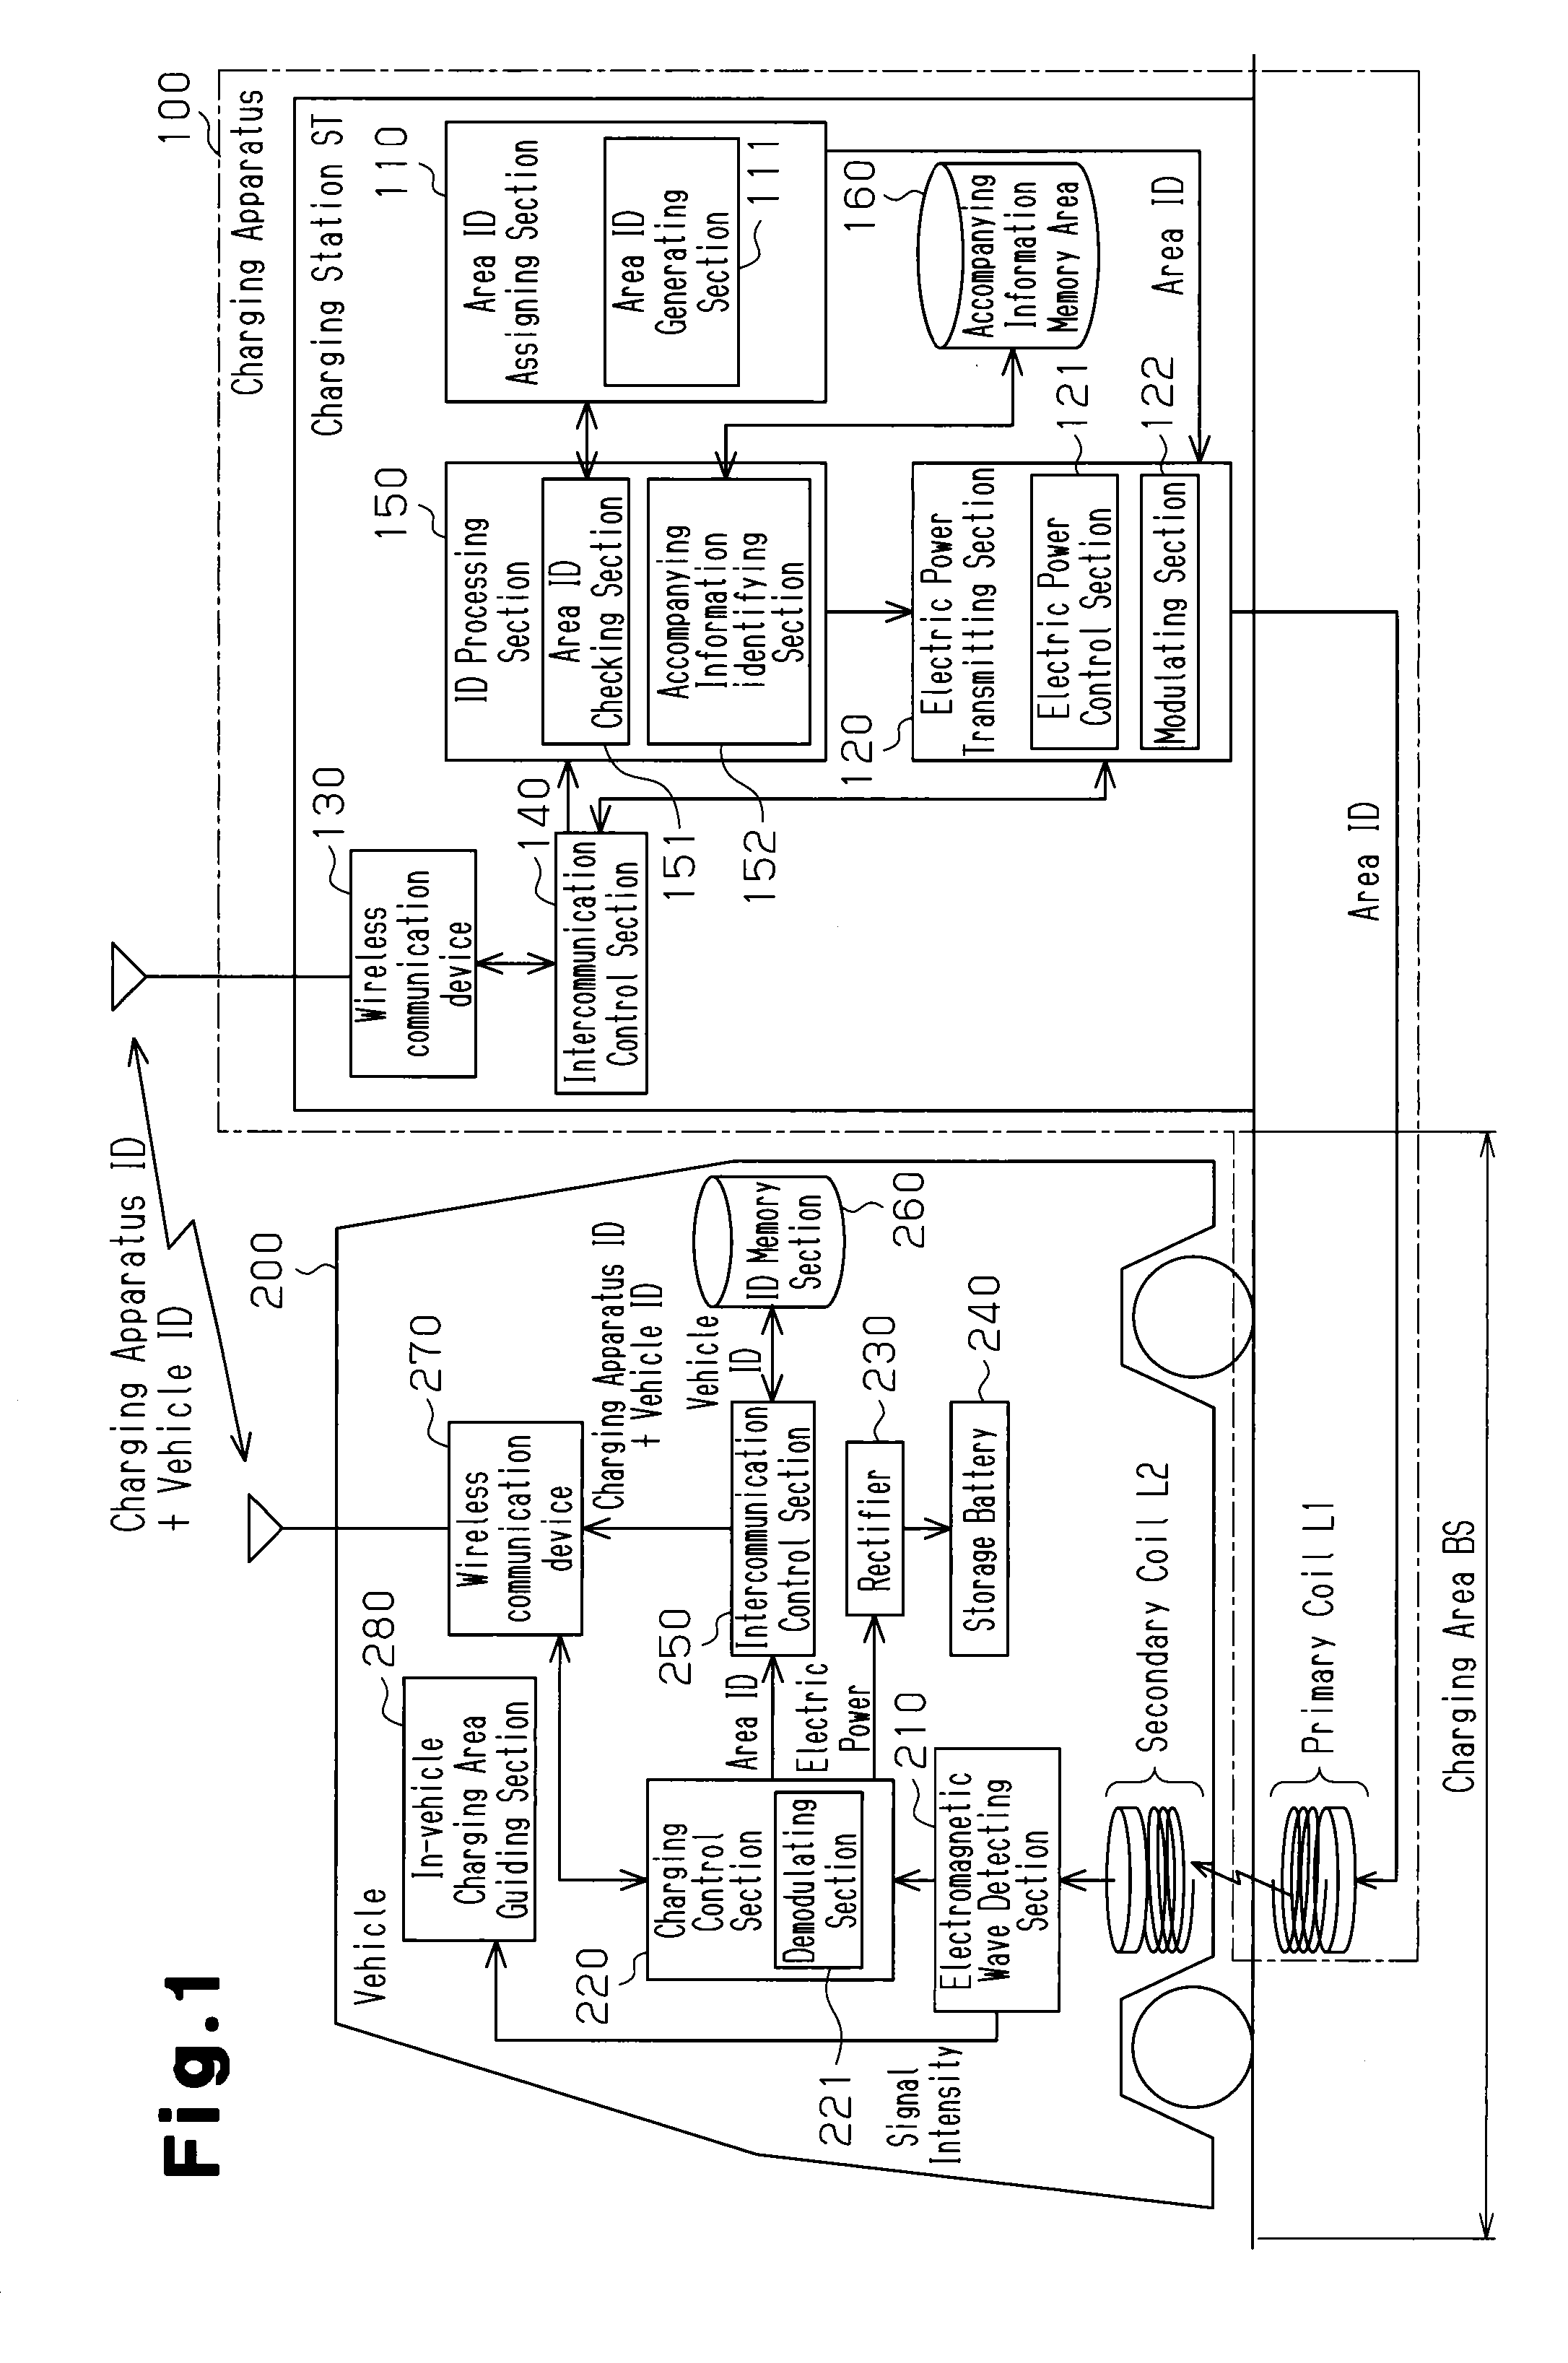 Non-contact charging system, non-contact charging method, non-contact charging type vehicle, and non-contact charging management apparatus